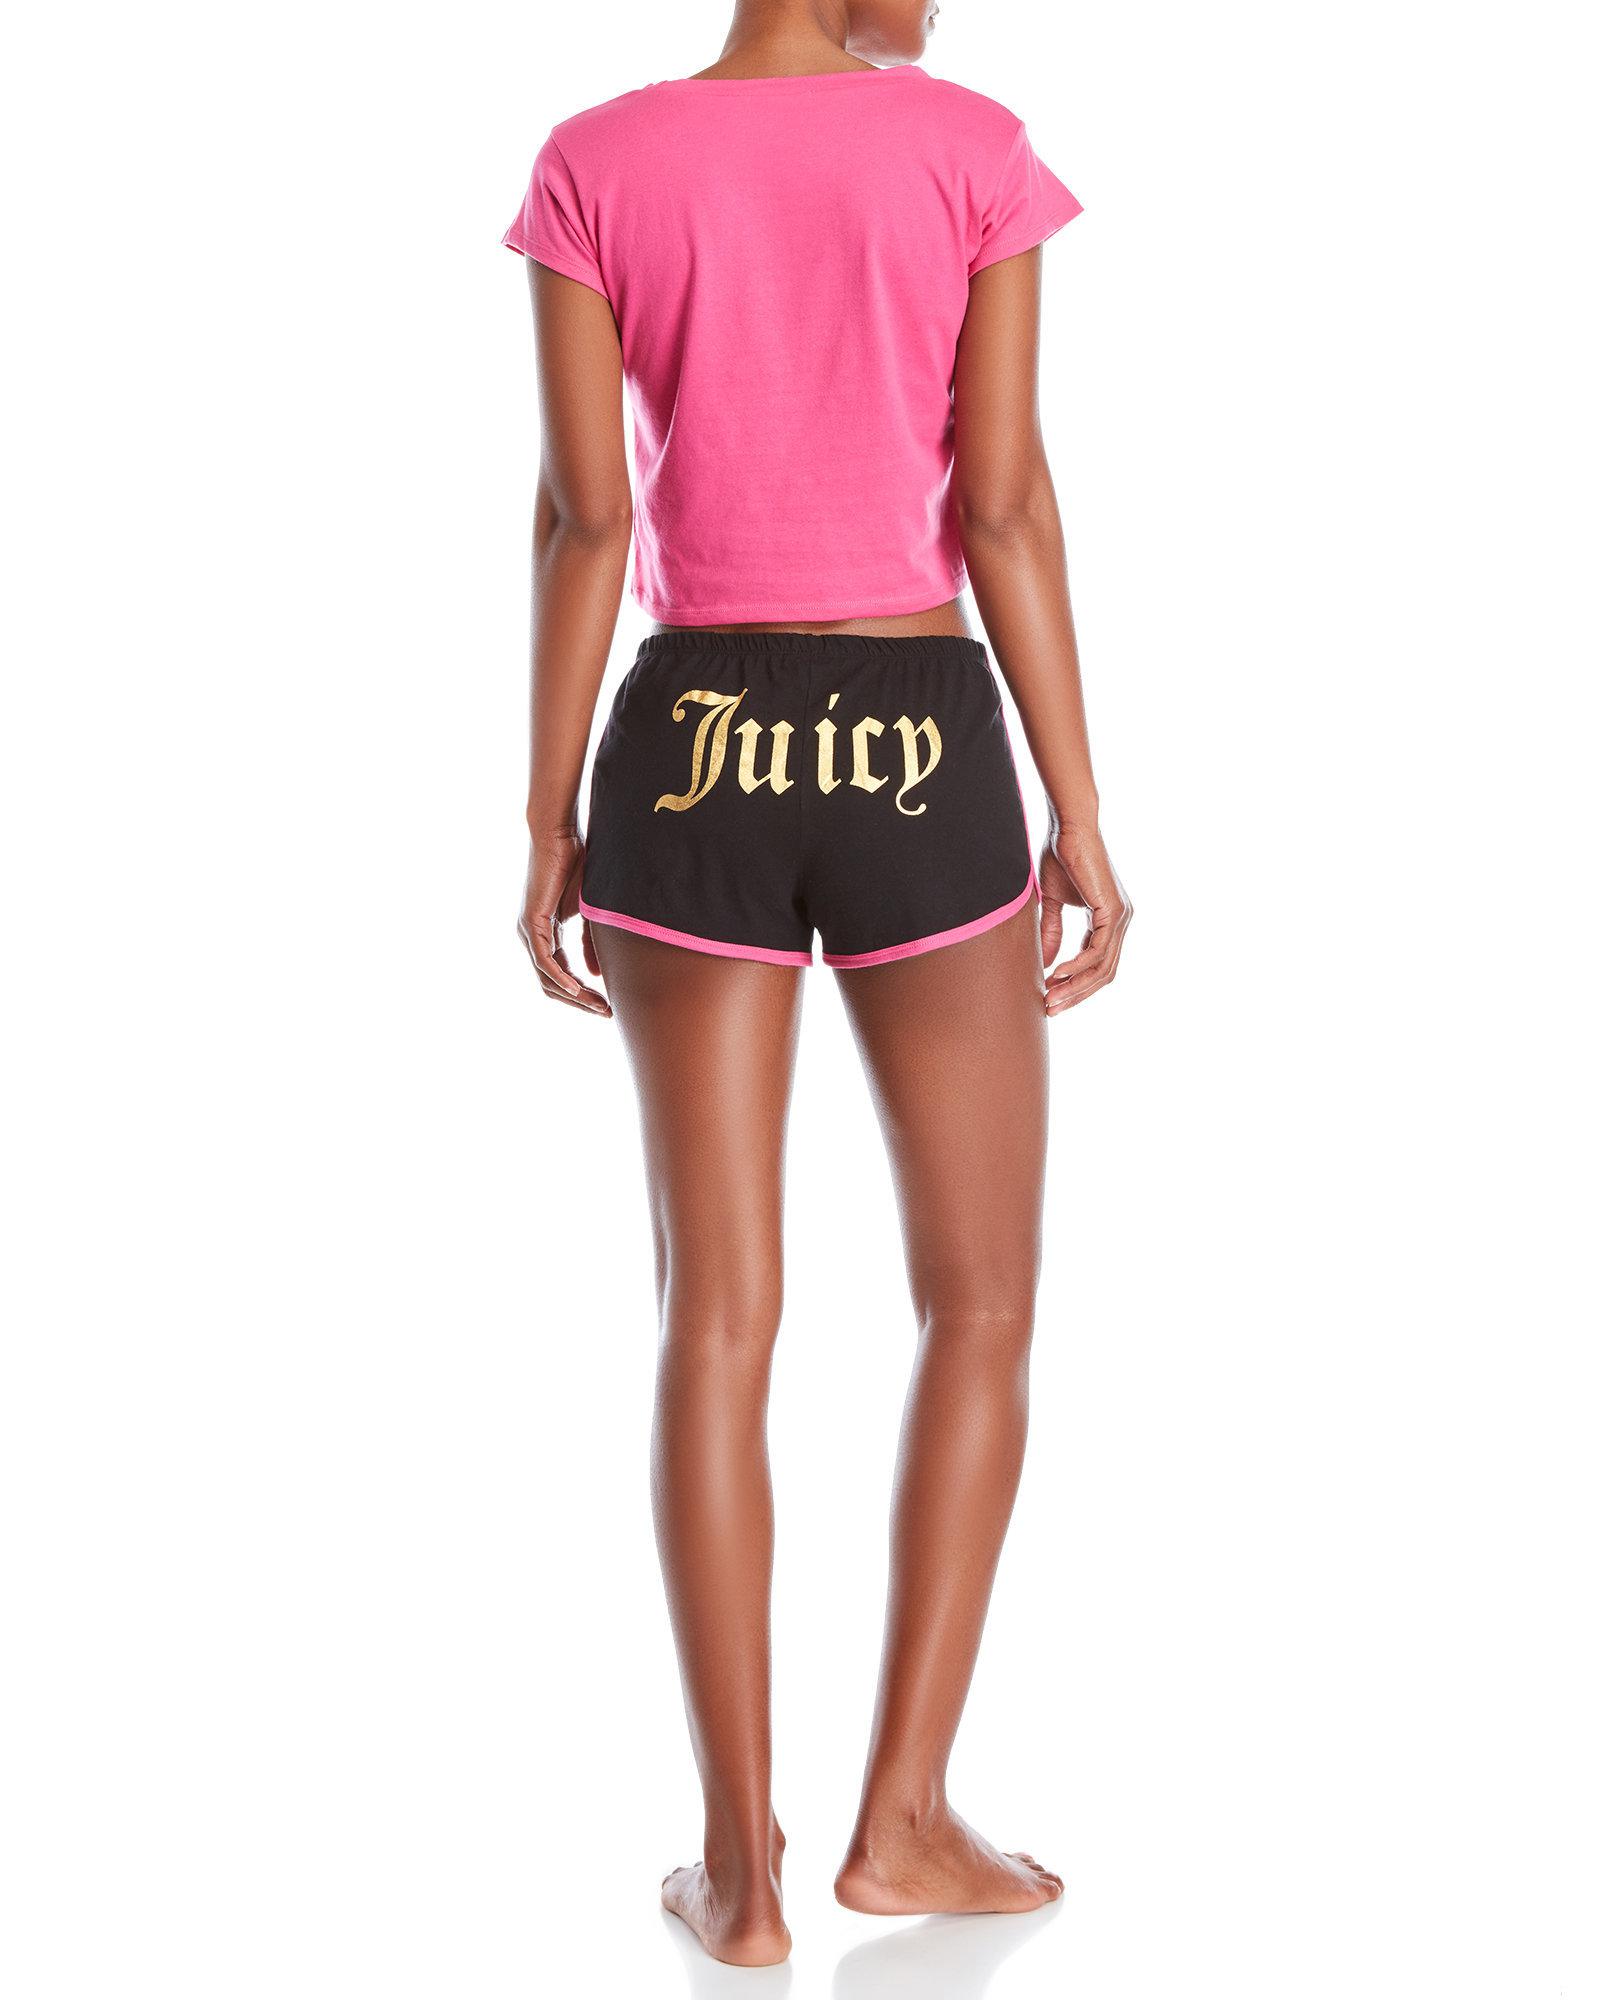 Juicy Couture Short Factory Sale, 51% OFF | www.kayakerguide.com